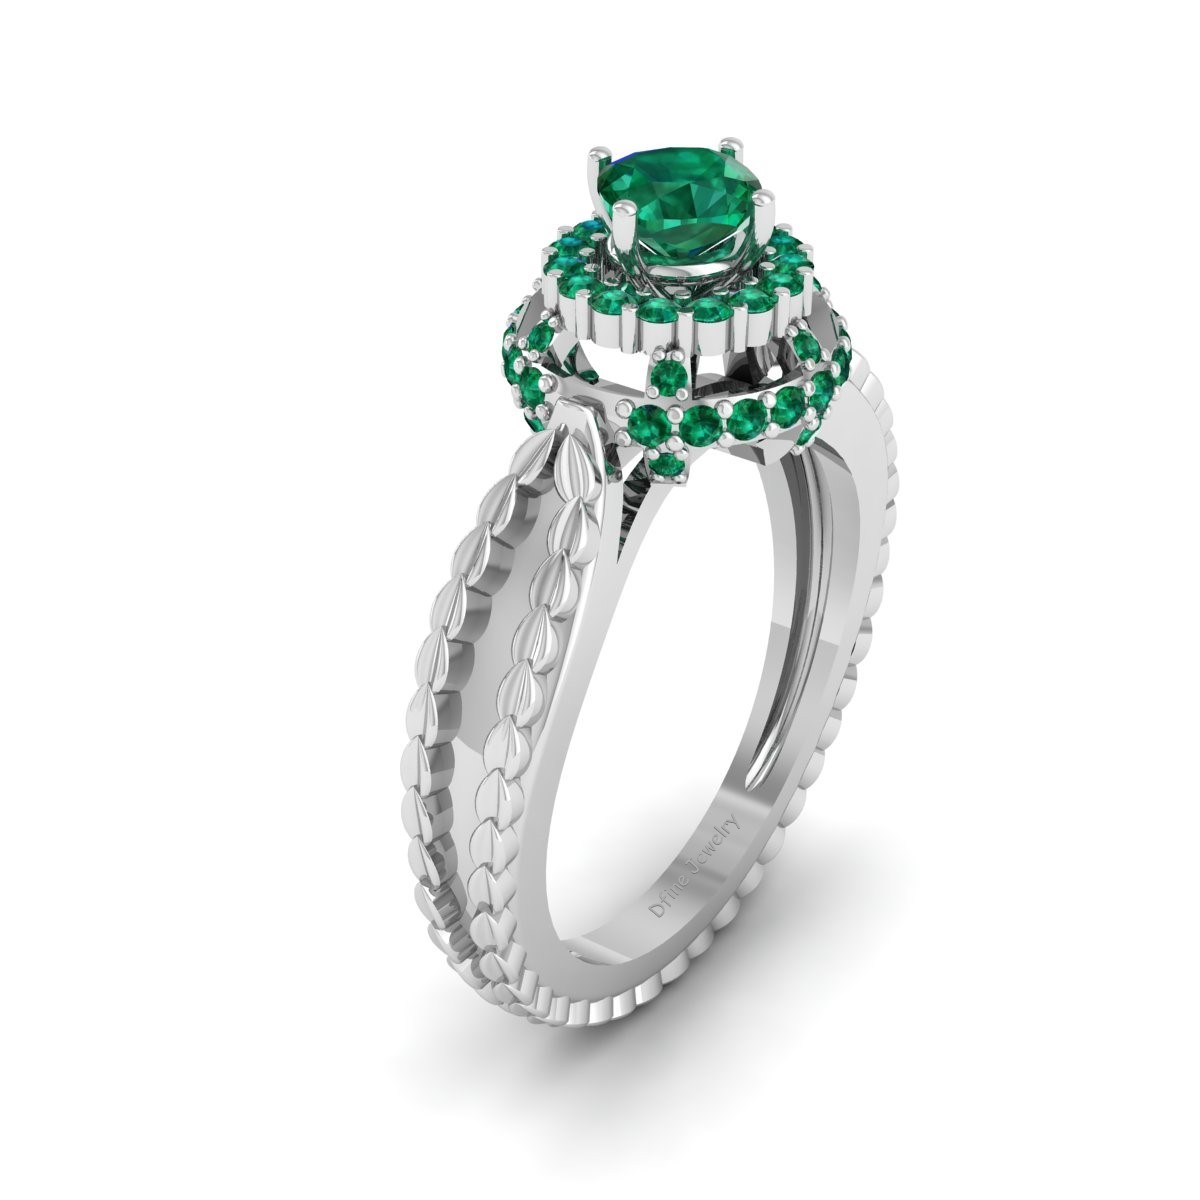 Cushion Cut Green Emerald Double Halo Wedding Ring For Women 925 Sterling Silver